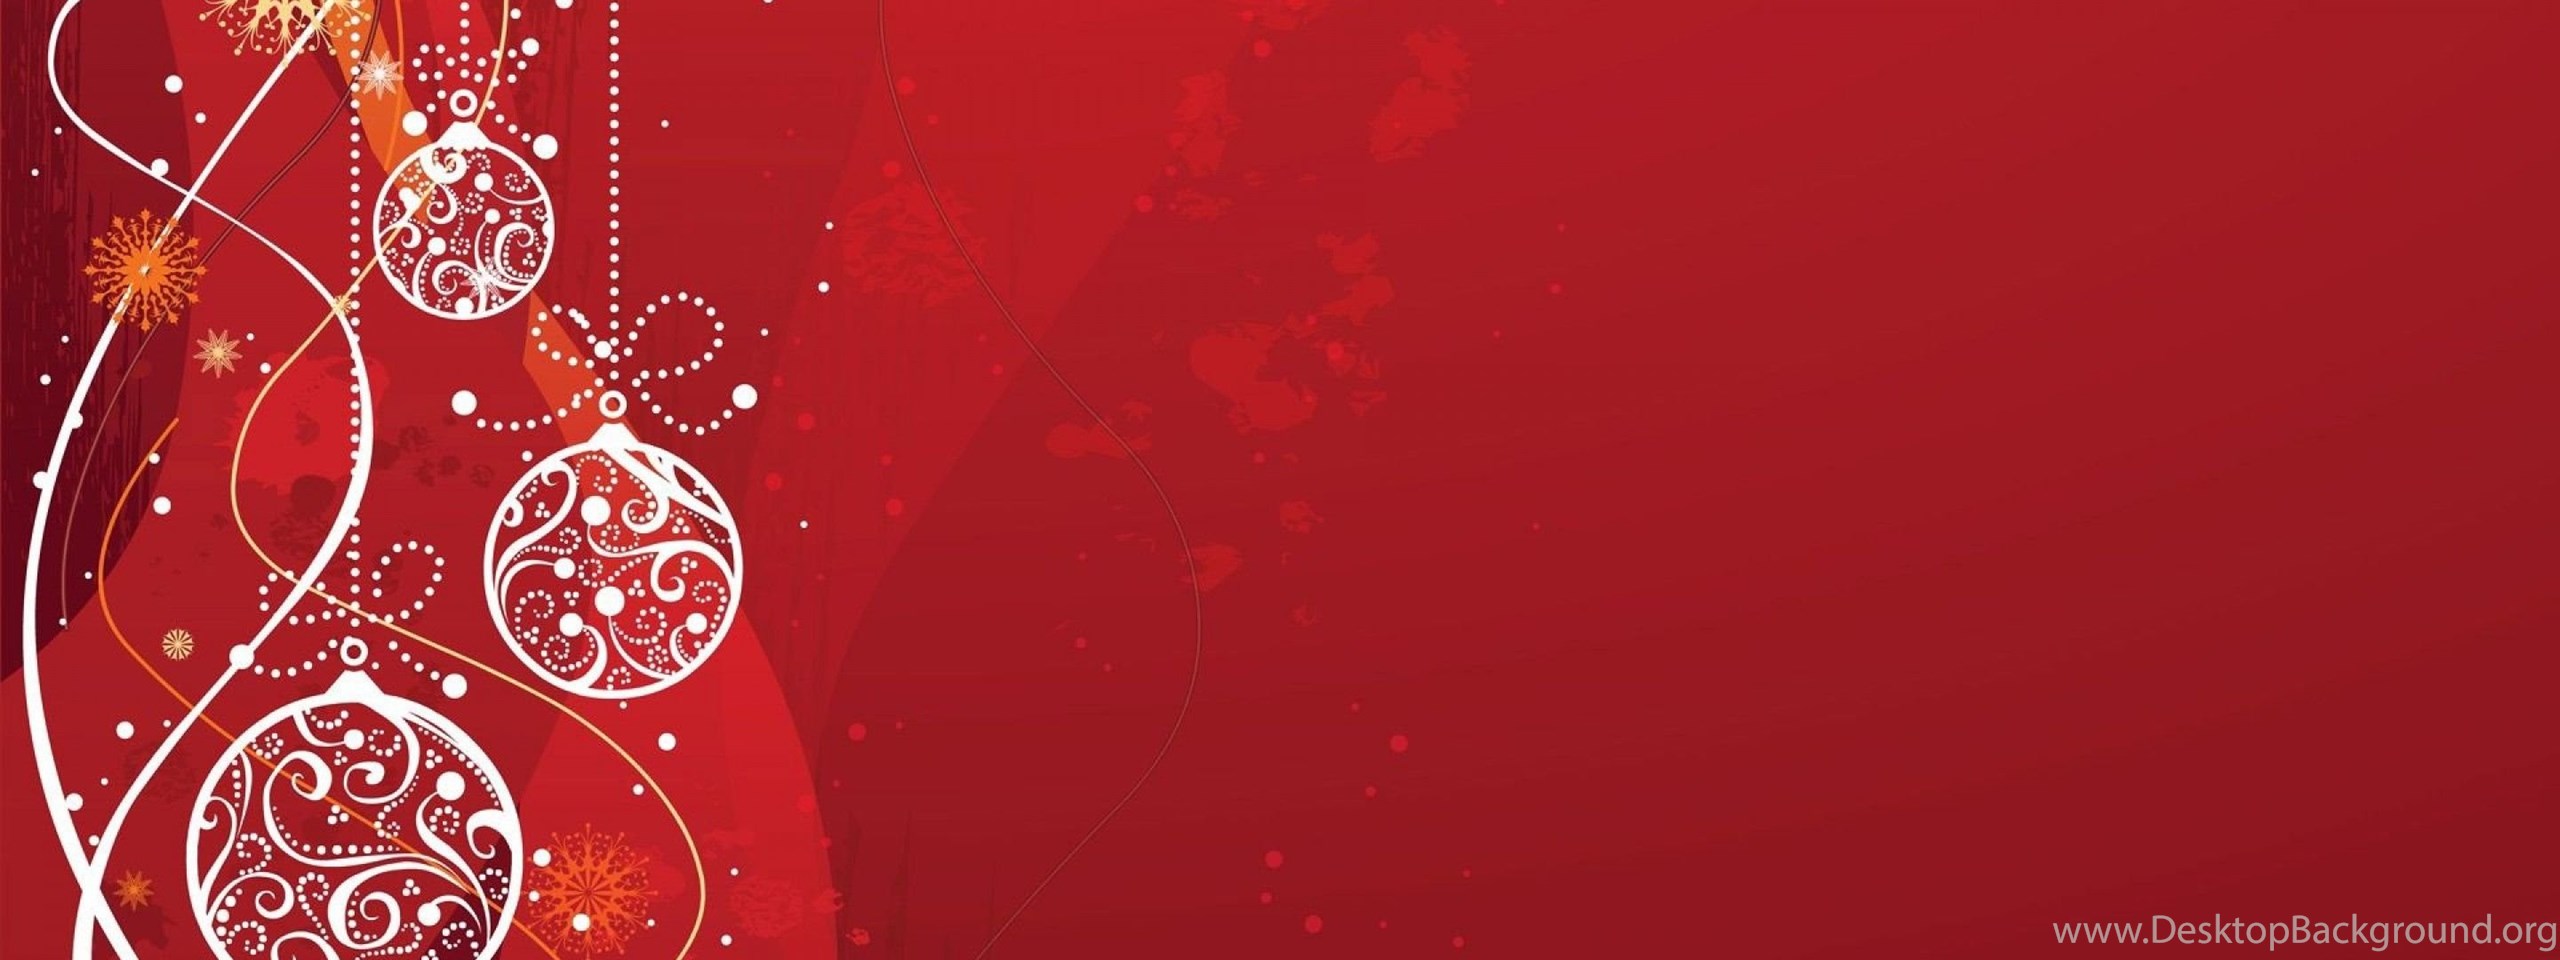 Download Red Christmas Backgrounds 1607639 Widescreen Dual Screen Wide 2560...